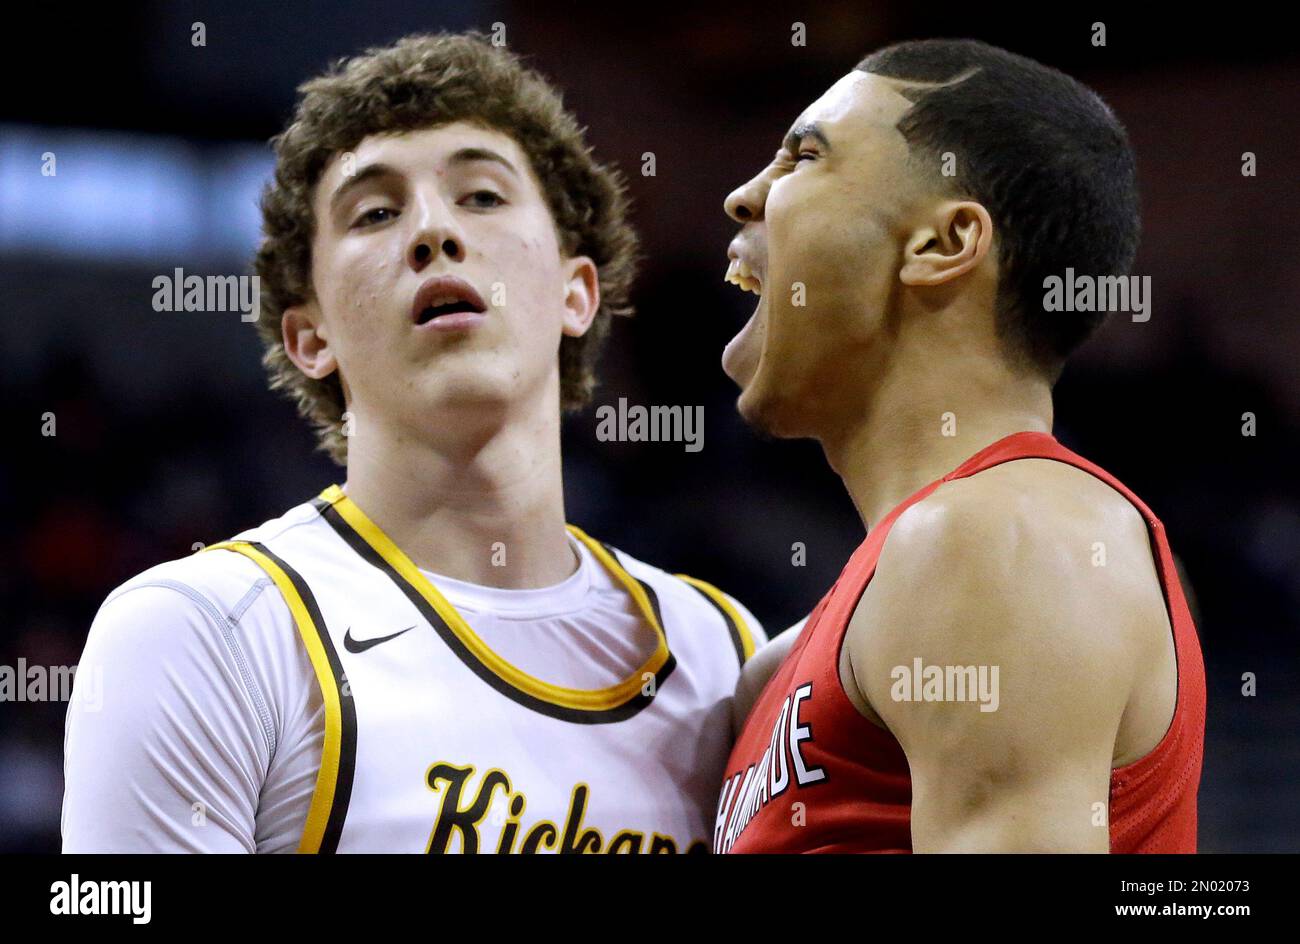 Chaminade's Jayson Tatum, right, celebrates after sinking a basket along  side Kickapoo's Jared Ridder during the first half of the Missouri Class 5  boys high school championship basketball game Saturday, March 19,